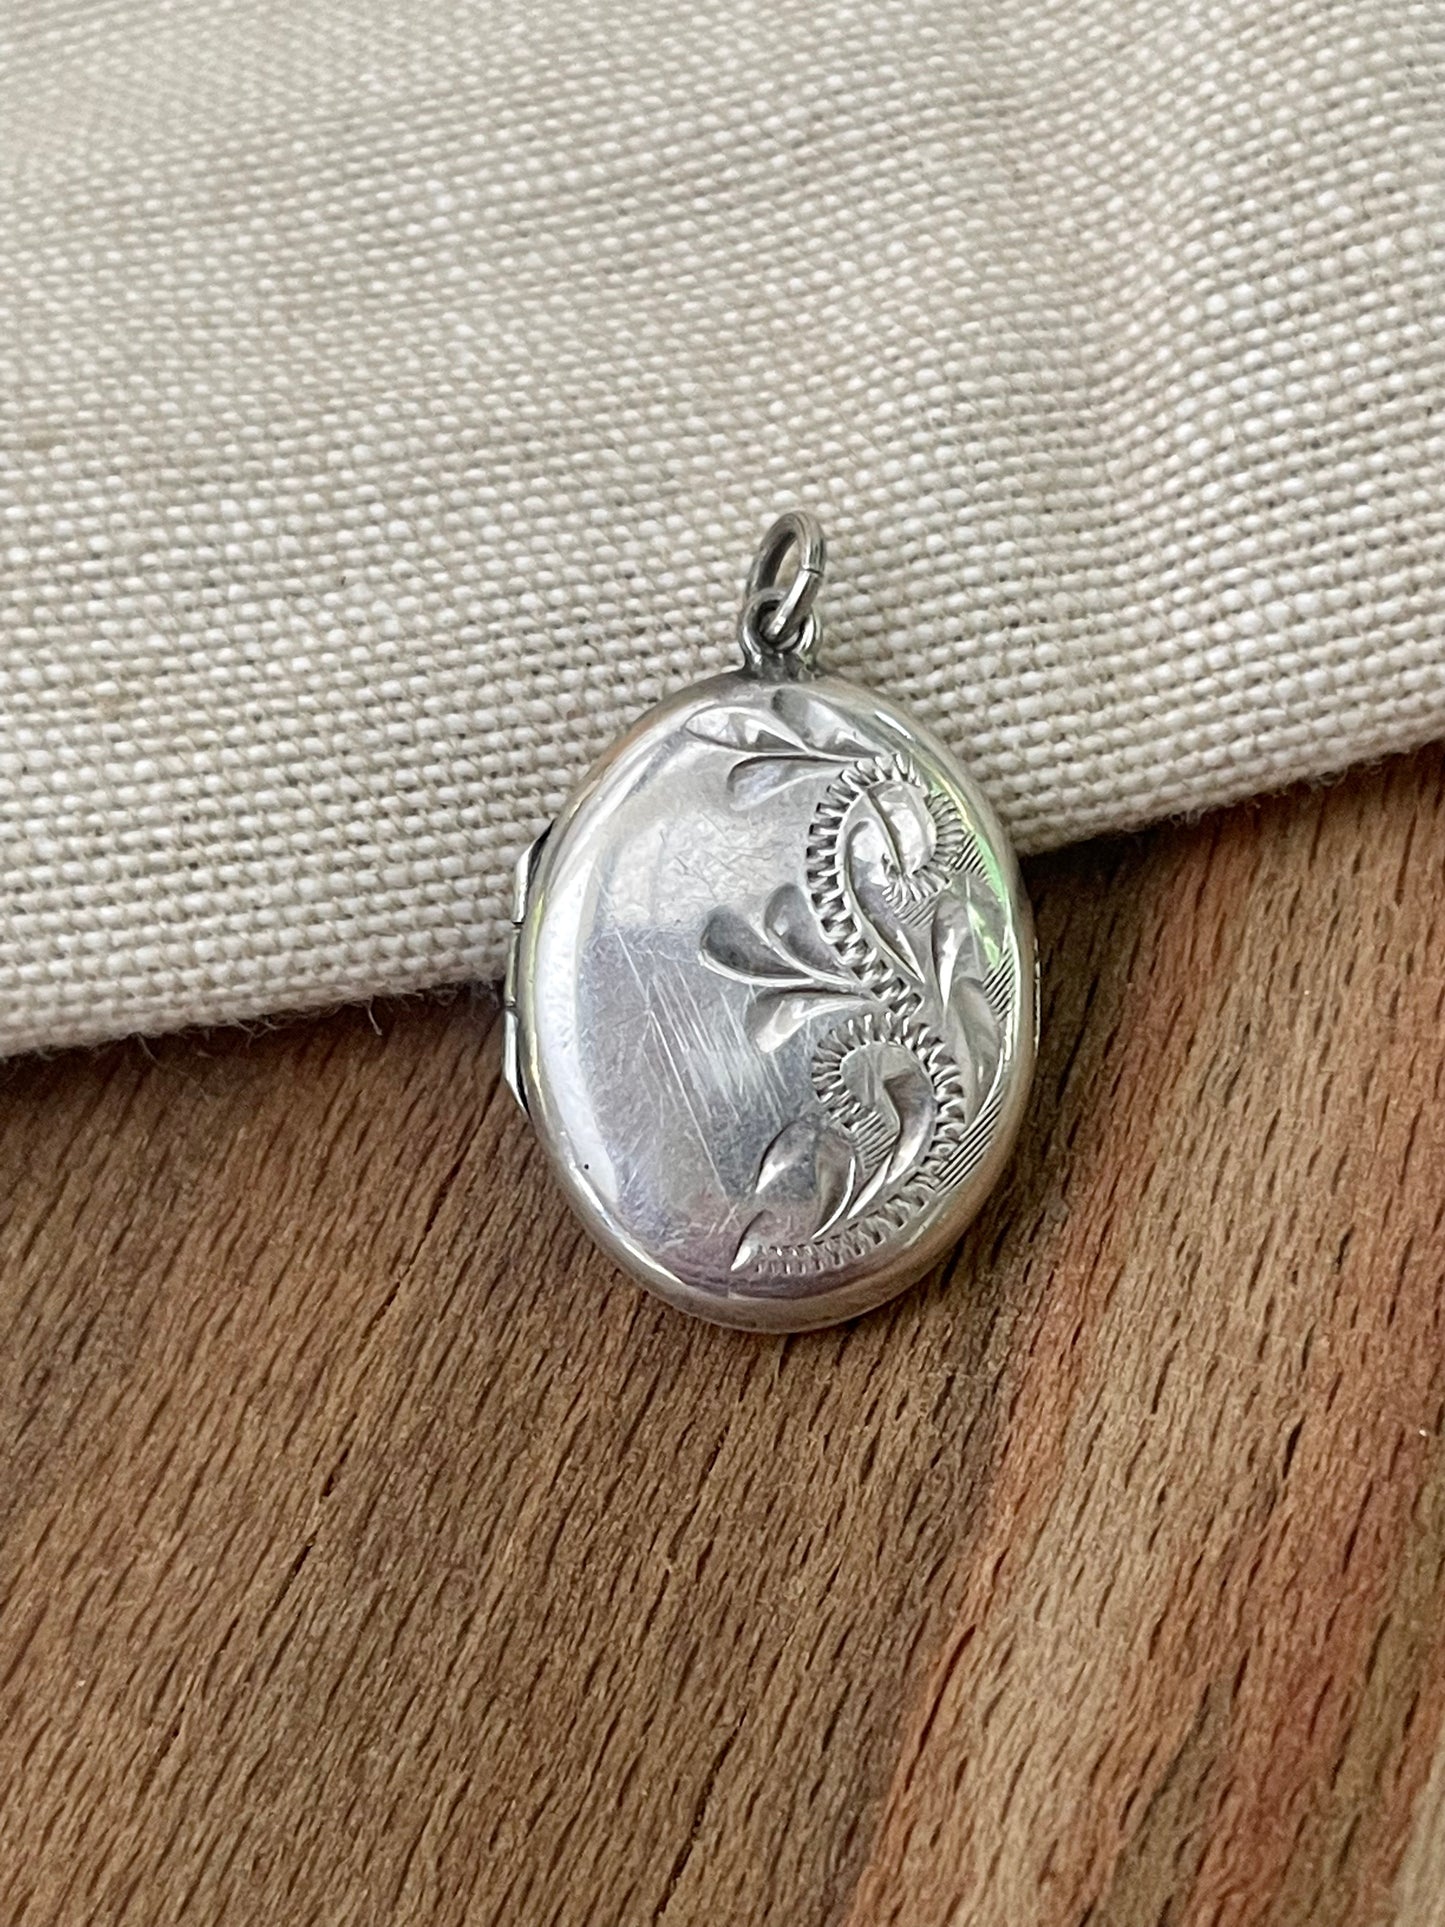 Small Engraved Pendant Locket Sterling 925 Silver Antique Vintage Retro Jewelry